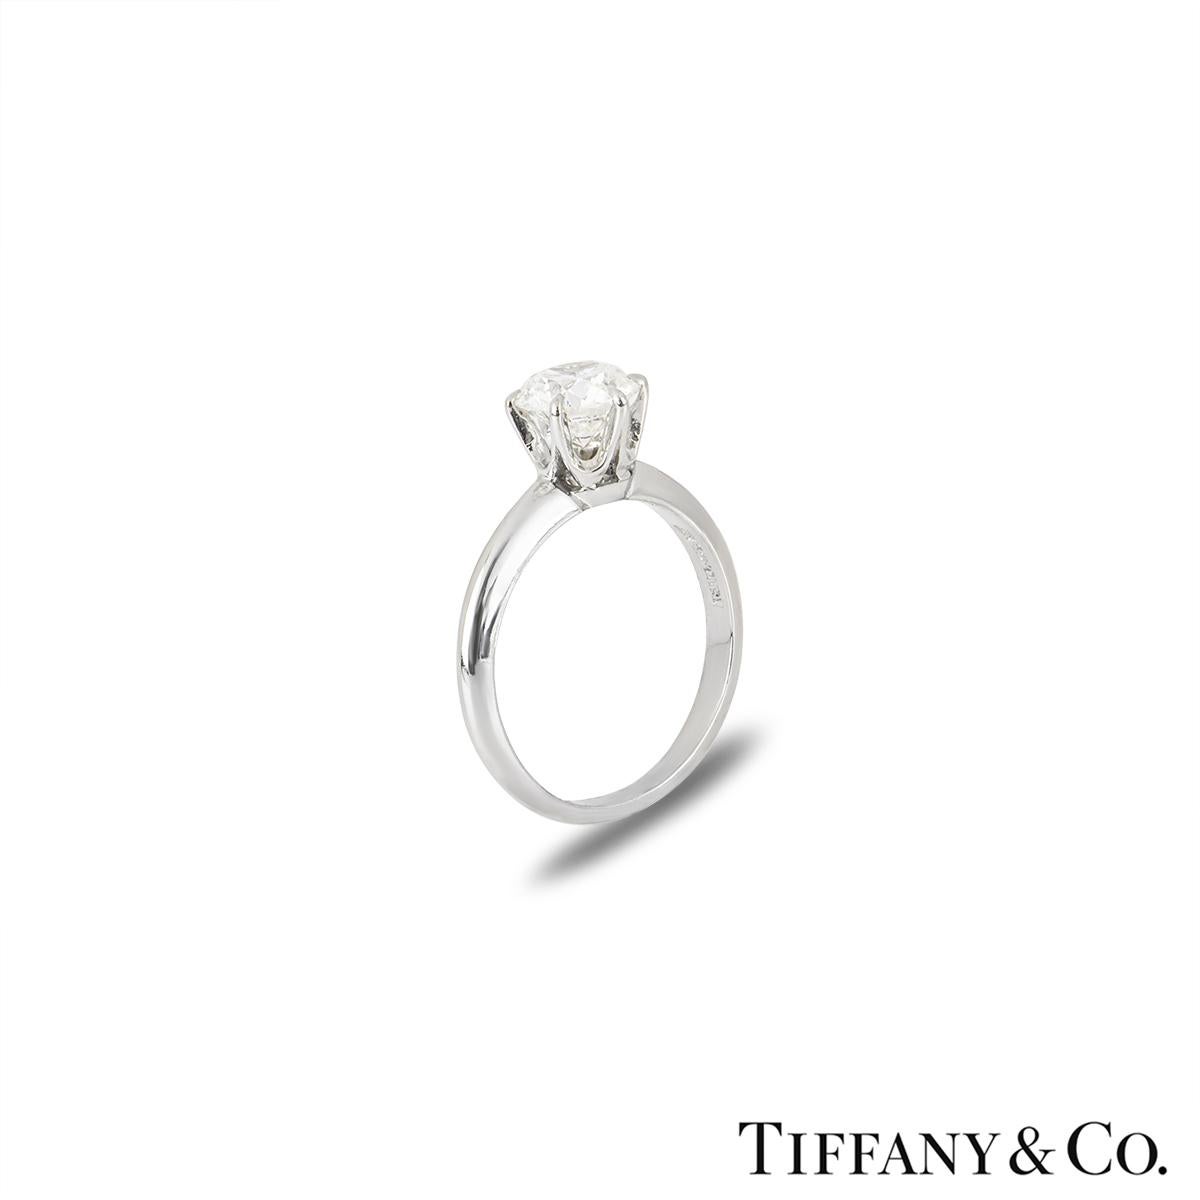 A beautiful platinum diamond ring by Tiffany & Co. from the Setting collection. The ring comprises of a round brilliant cut diamond in a 6 claw setting with a weight of 1.10ct, I colour and VVS2 clarity. The diamond scores an excellent rating in all